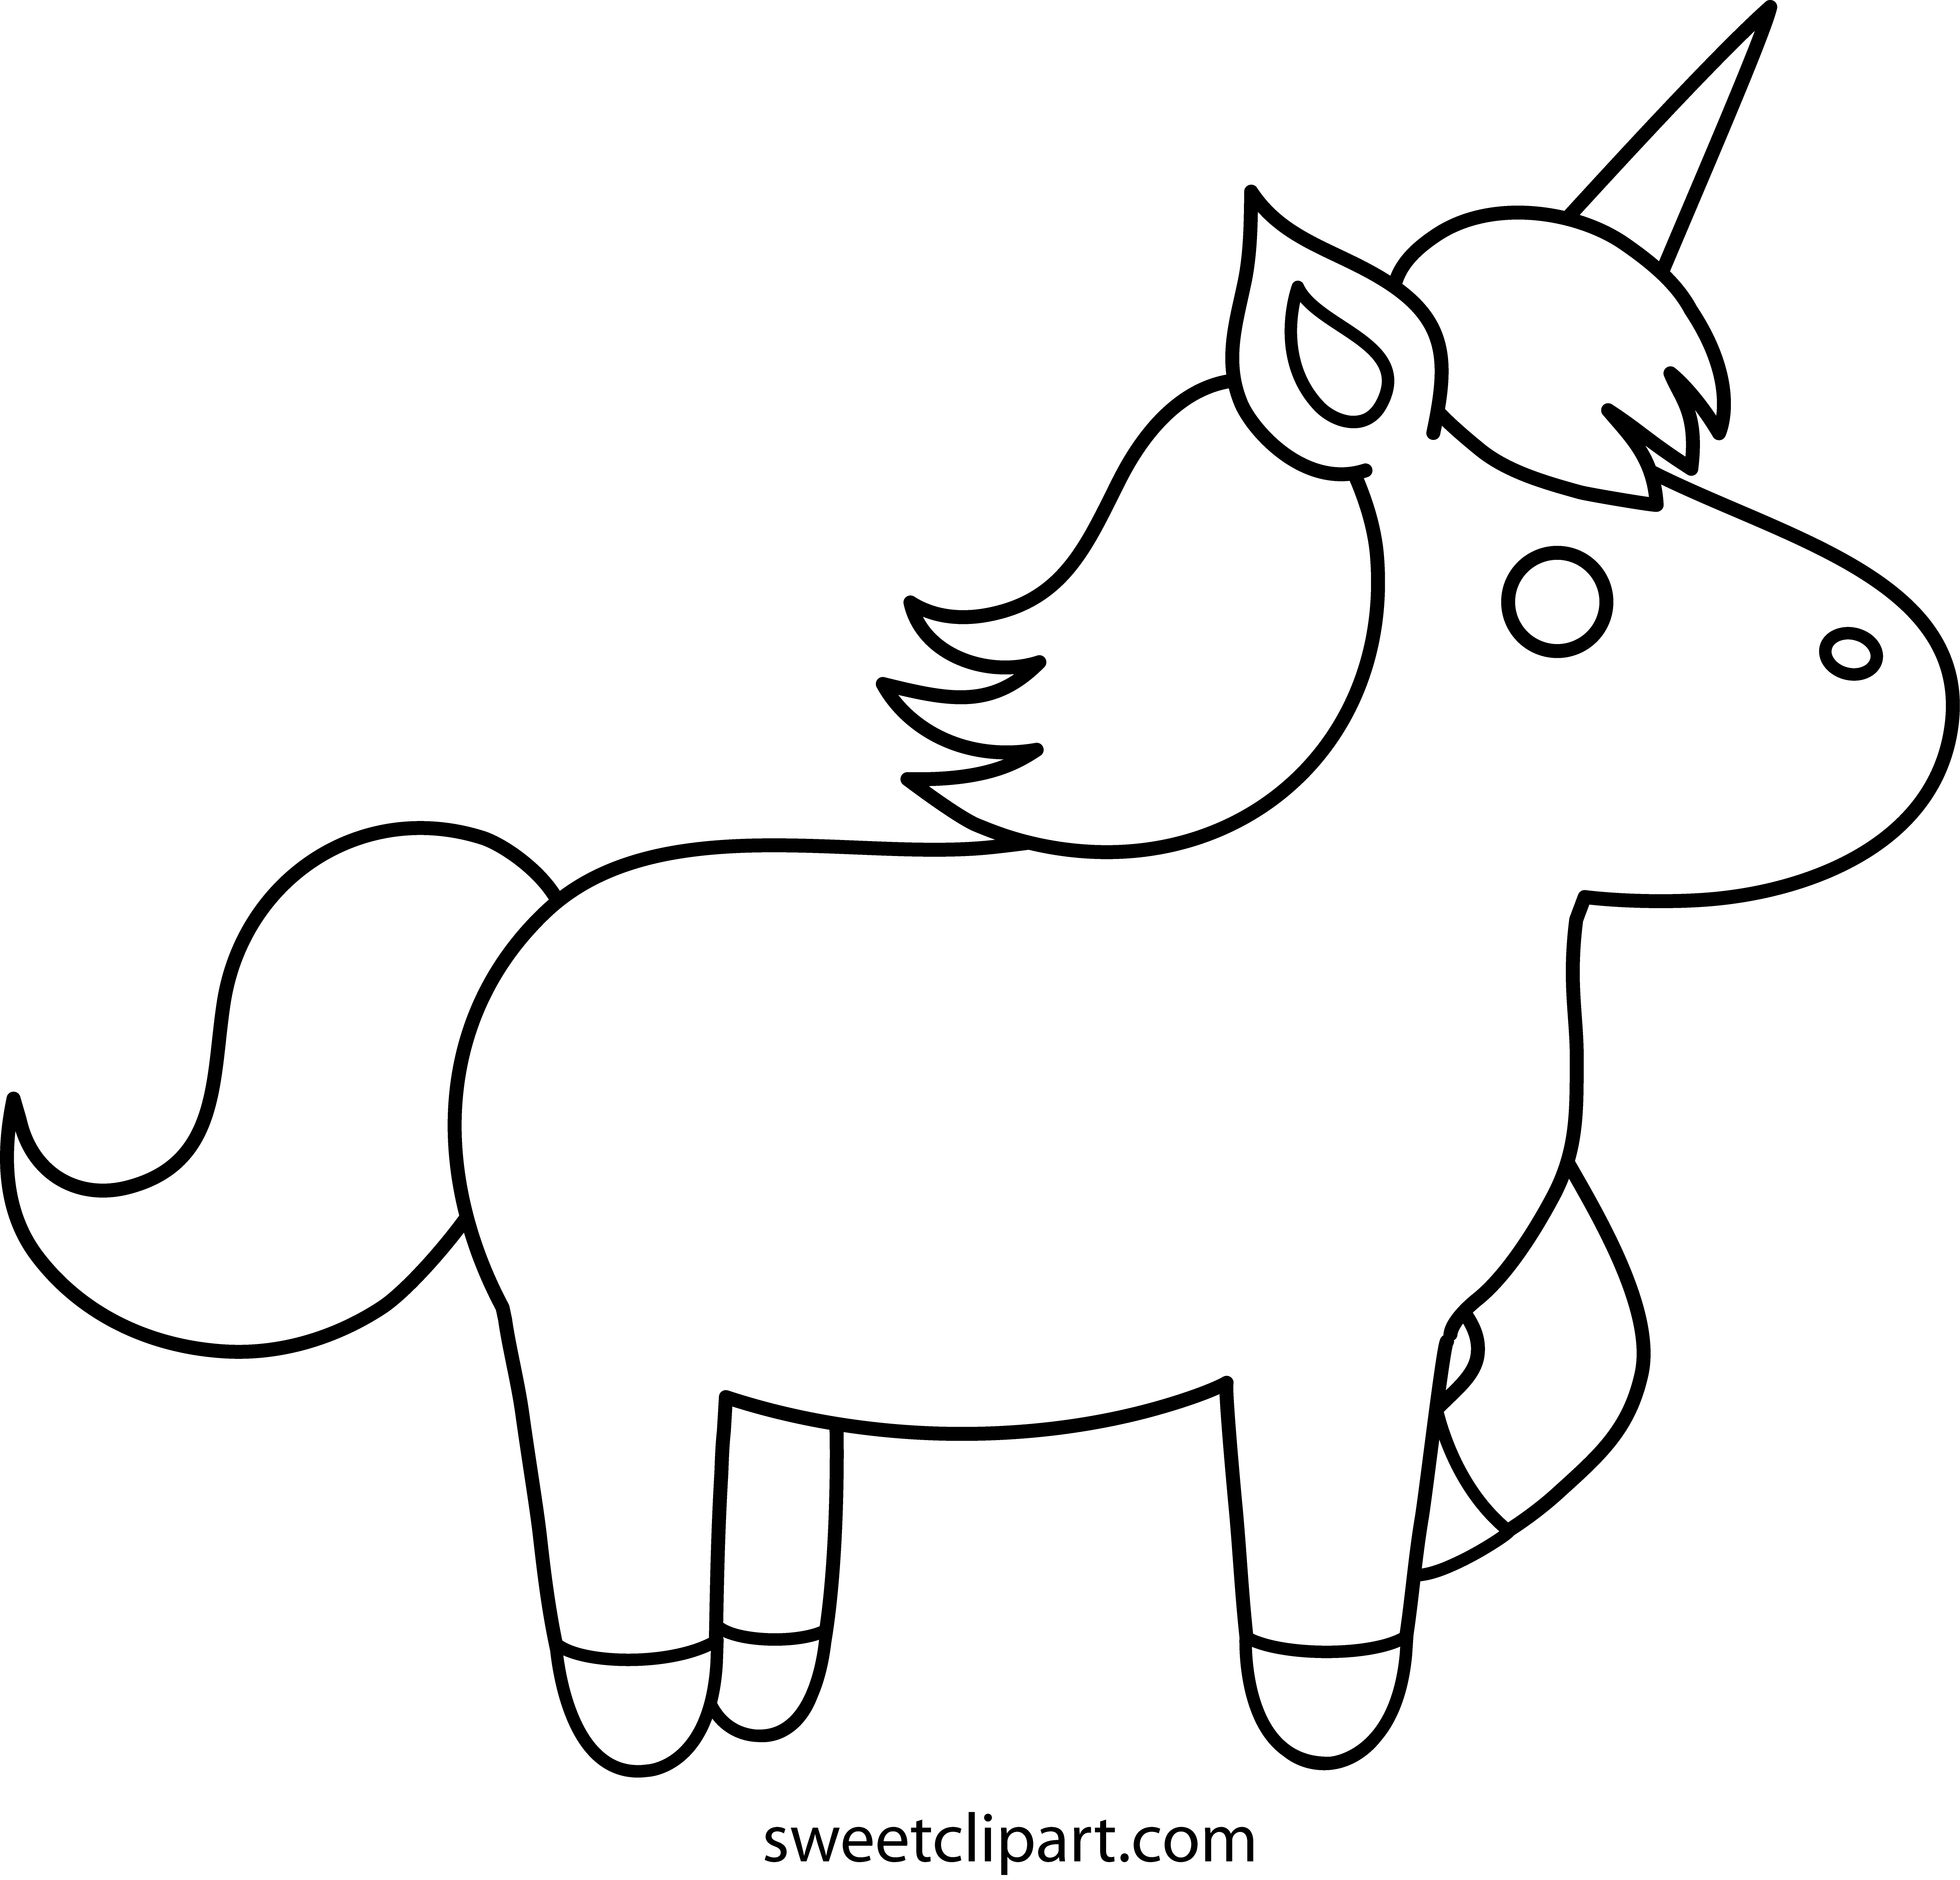 Easy Unicorn Coloring Pages at GetDrawings | Free download